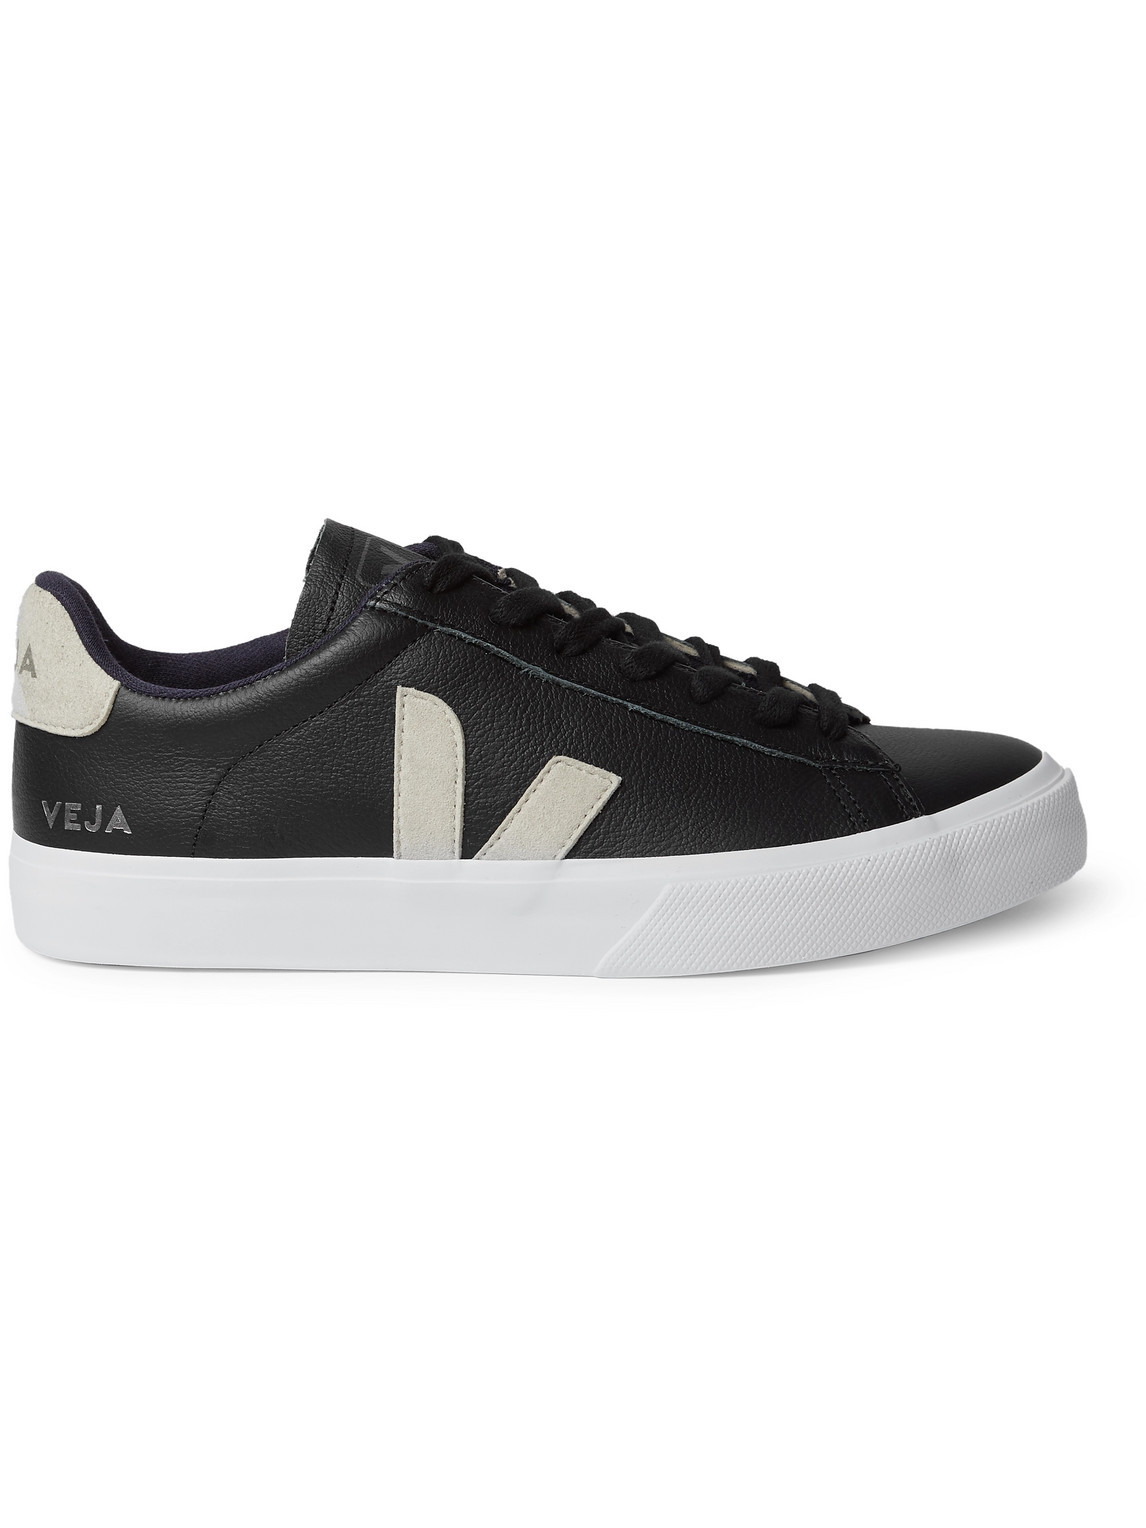 Veja Campo Suede-trimmed Leather Sneakers In Black